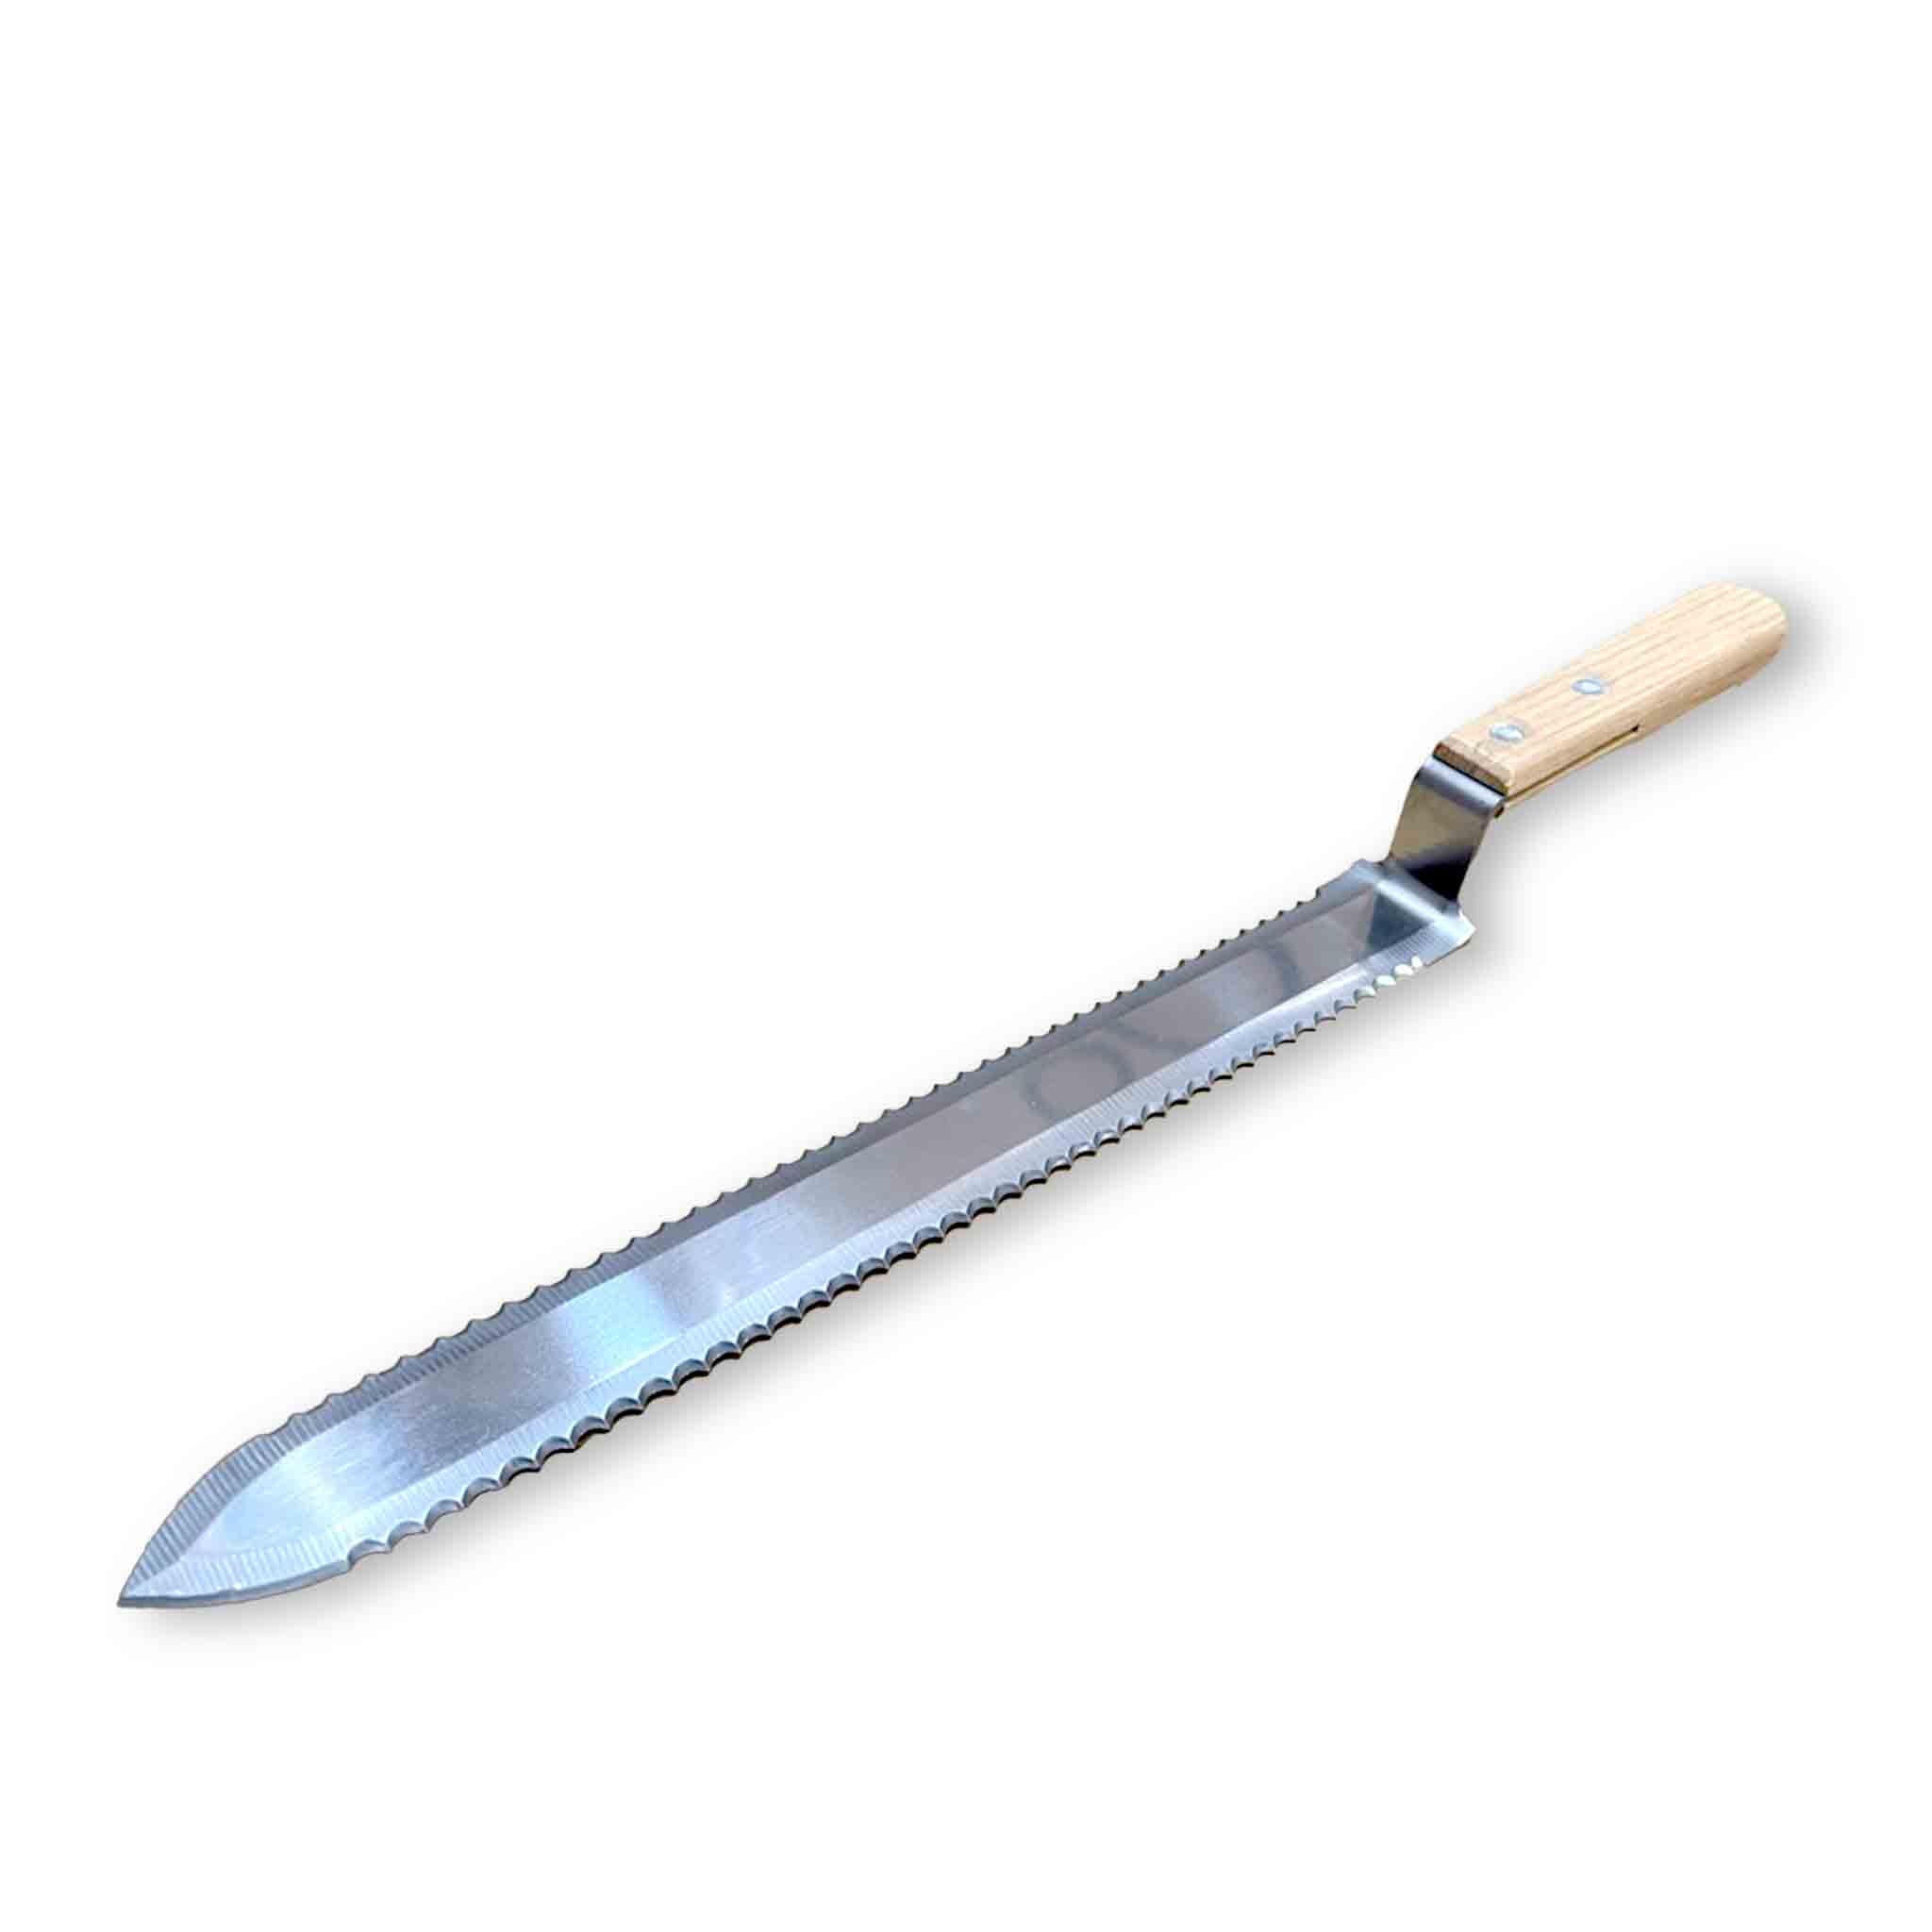 https://cdn.shopify.com/s/files/1/0414/1973/5191/files/processing-uncapping-cold-knife-serrated-01.jpg?v=1688913499&width=2048